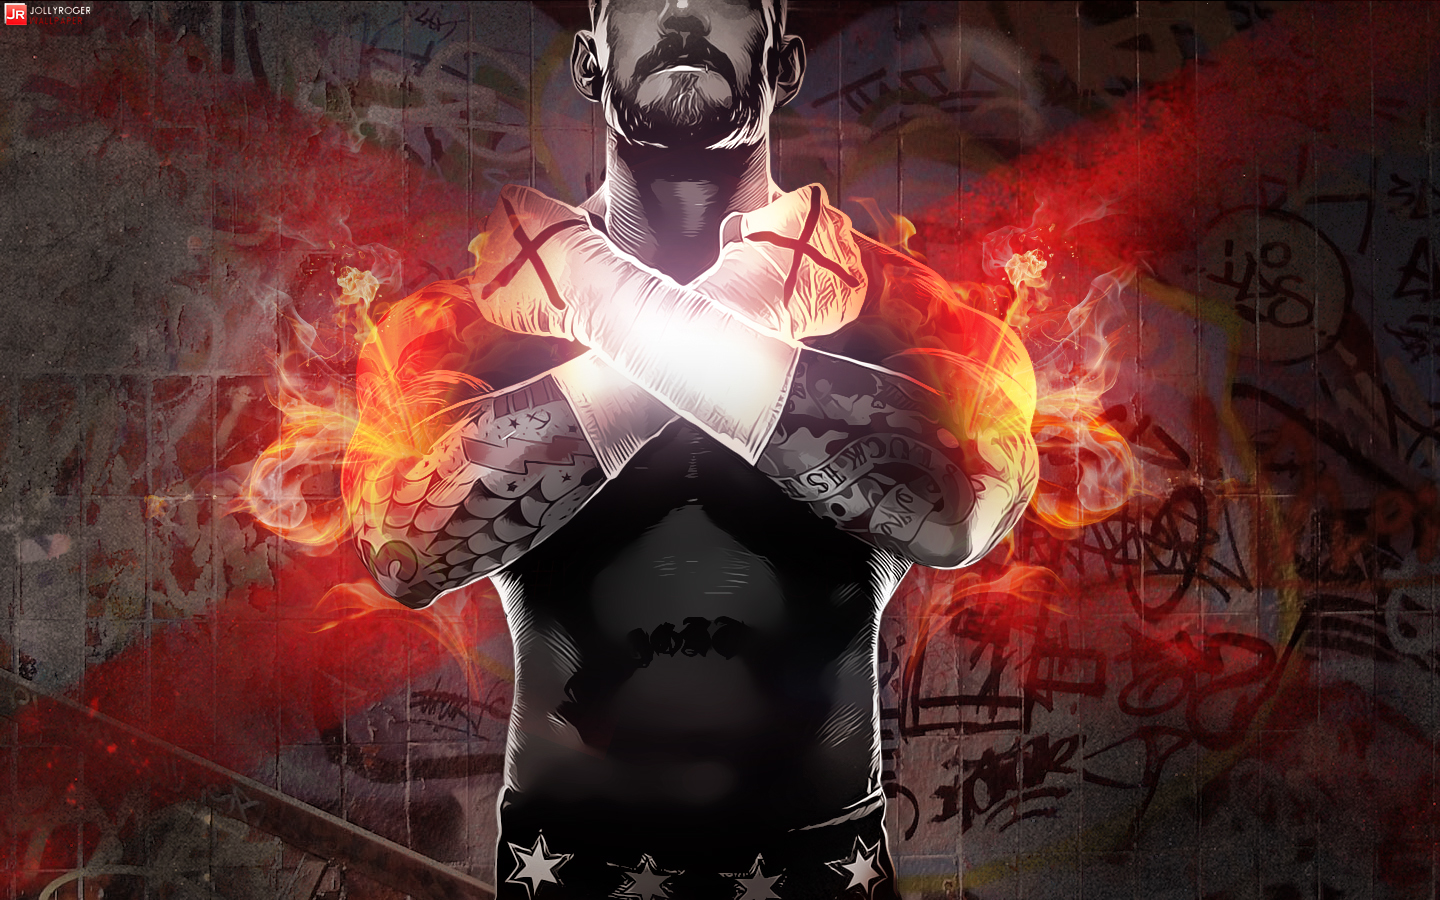 Free Download Cm Punk Wwe 12 Champion Wallpapers Its All About 1440x900 For Your Desktop Mobile Tablet Explore 78 Wwe Twitter Backgrounds Wwe Twitter Backgrounds Schumacher Twitter Wallpaper Twitter Header Wallpapers